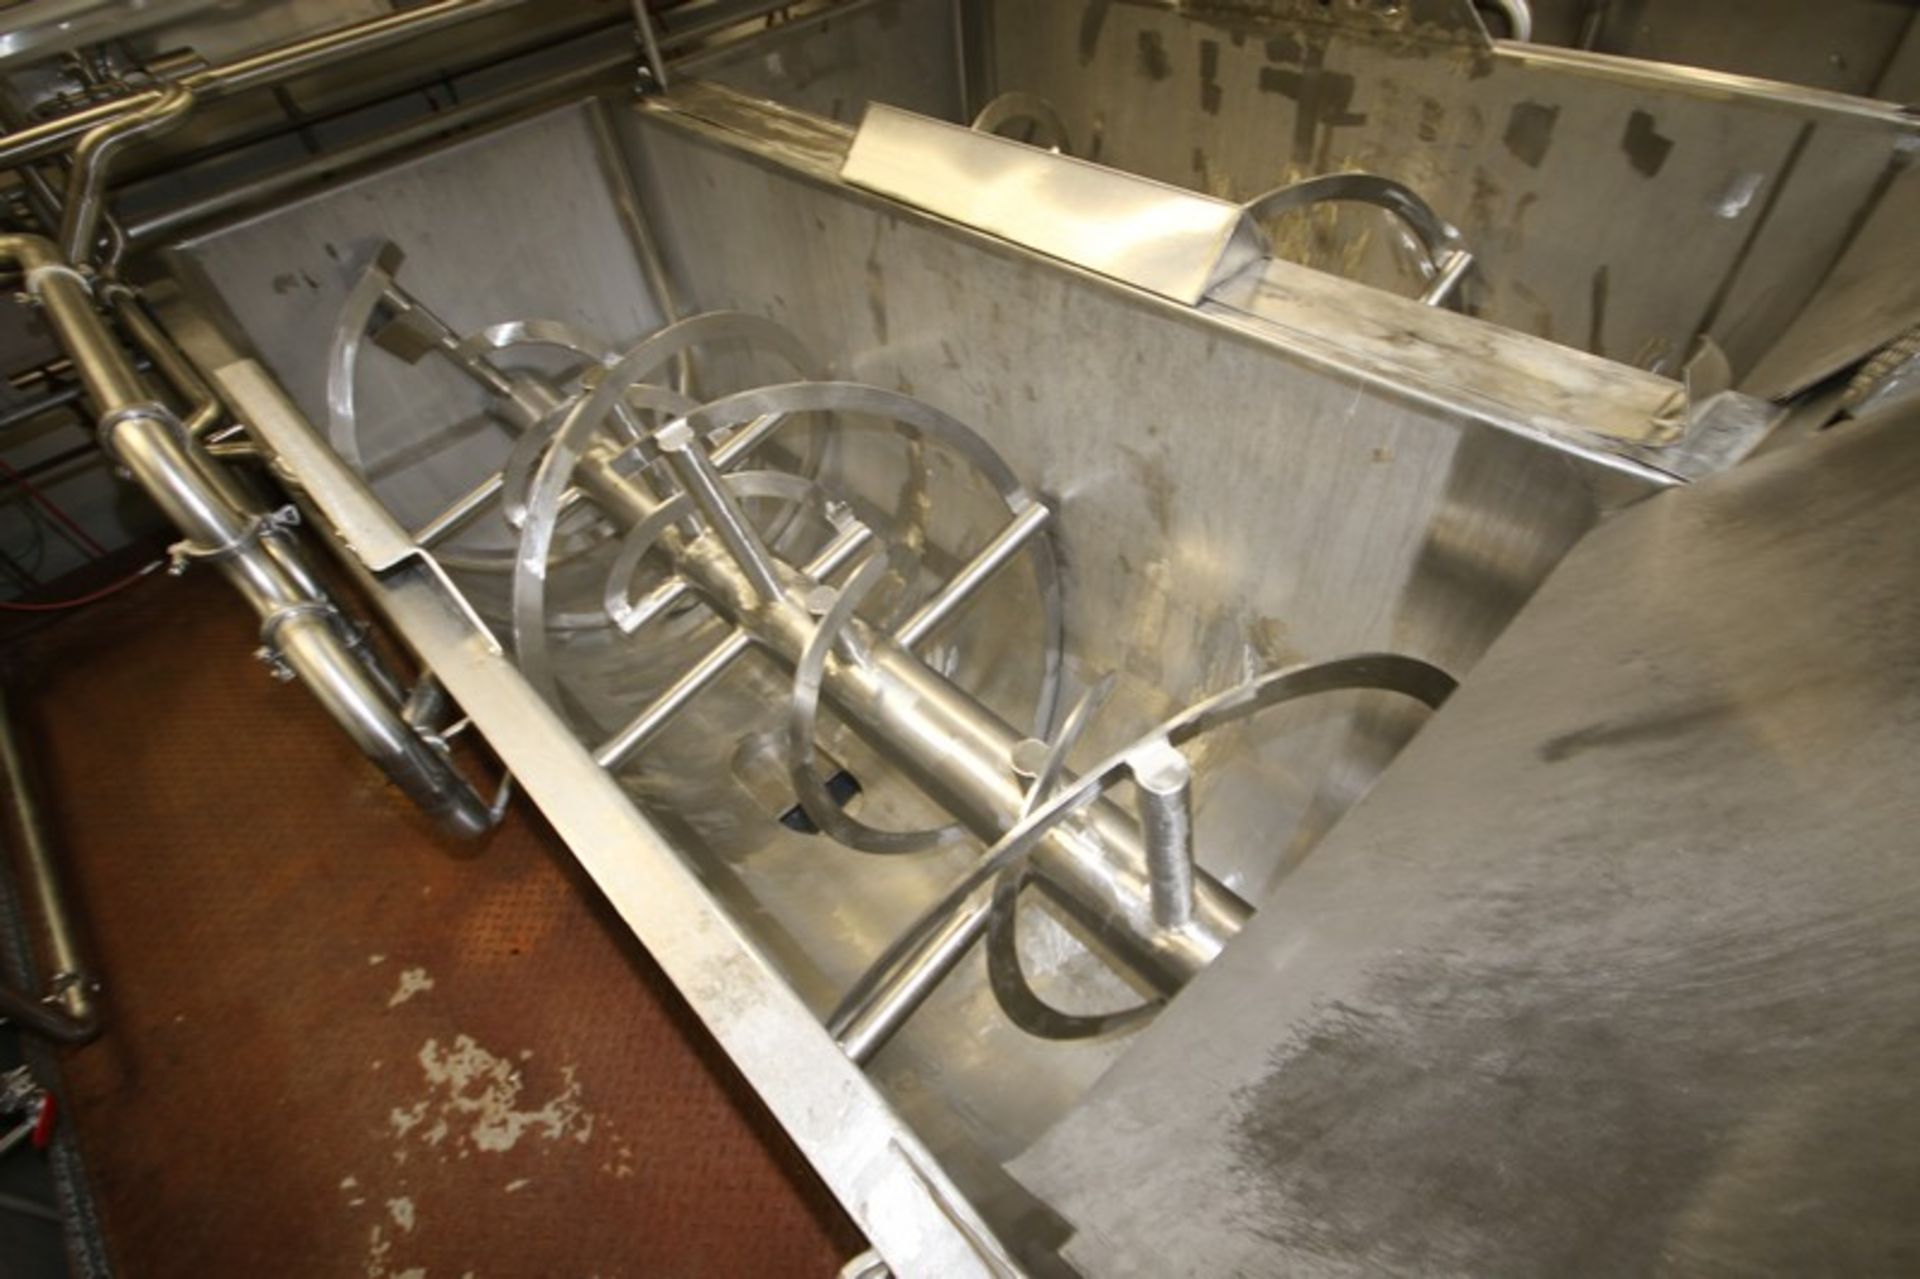 14,000 lb. S/S Ribbon Blender, with 75 hp Motor, 460 Volts, 3 Phase, Internal Blending Compartment - Image 5 of 17